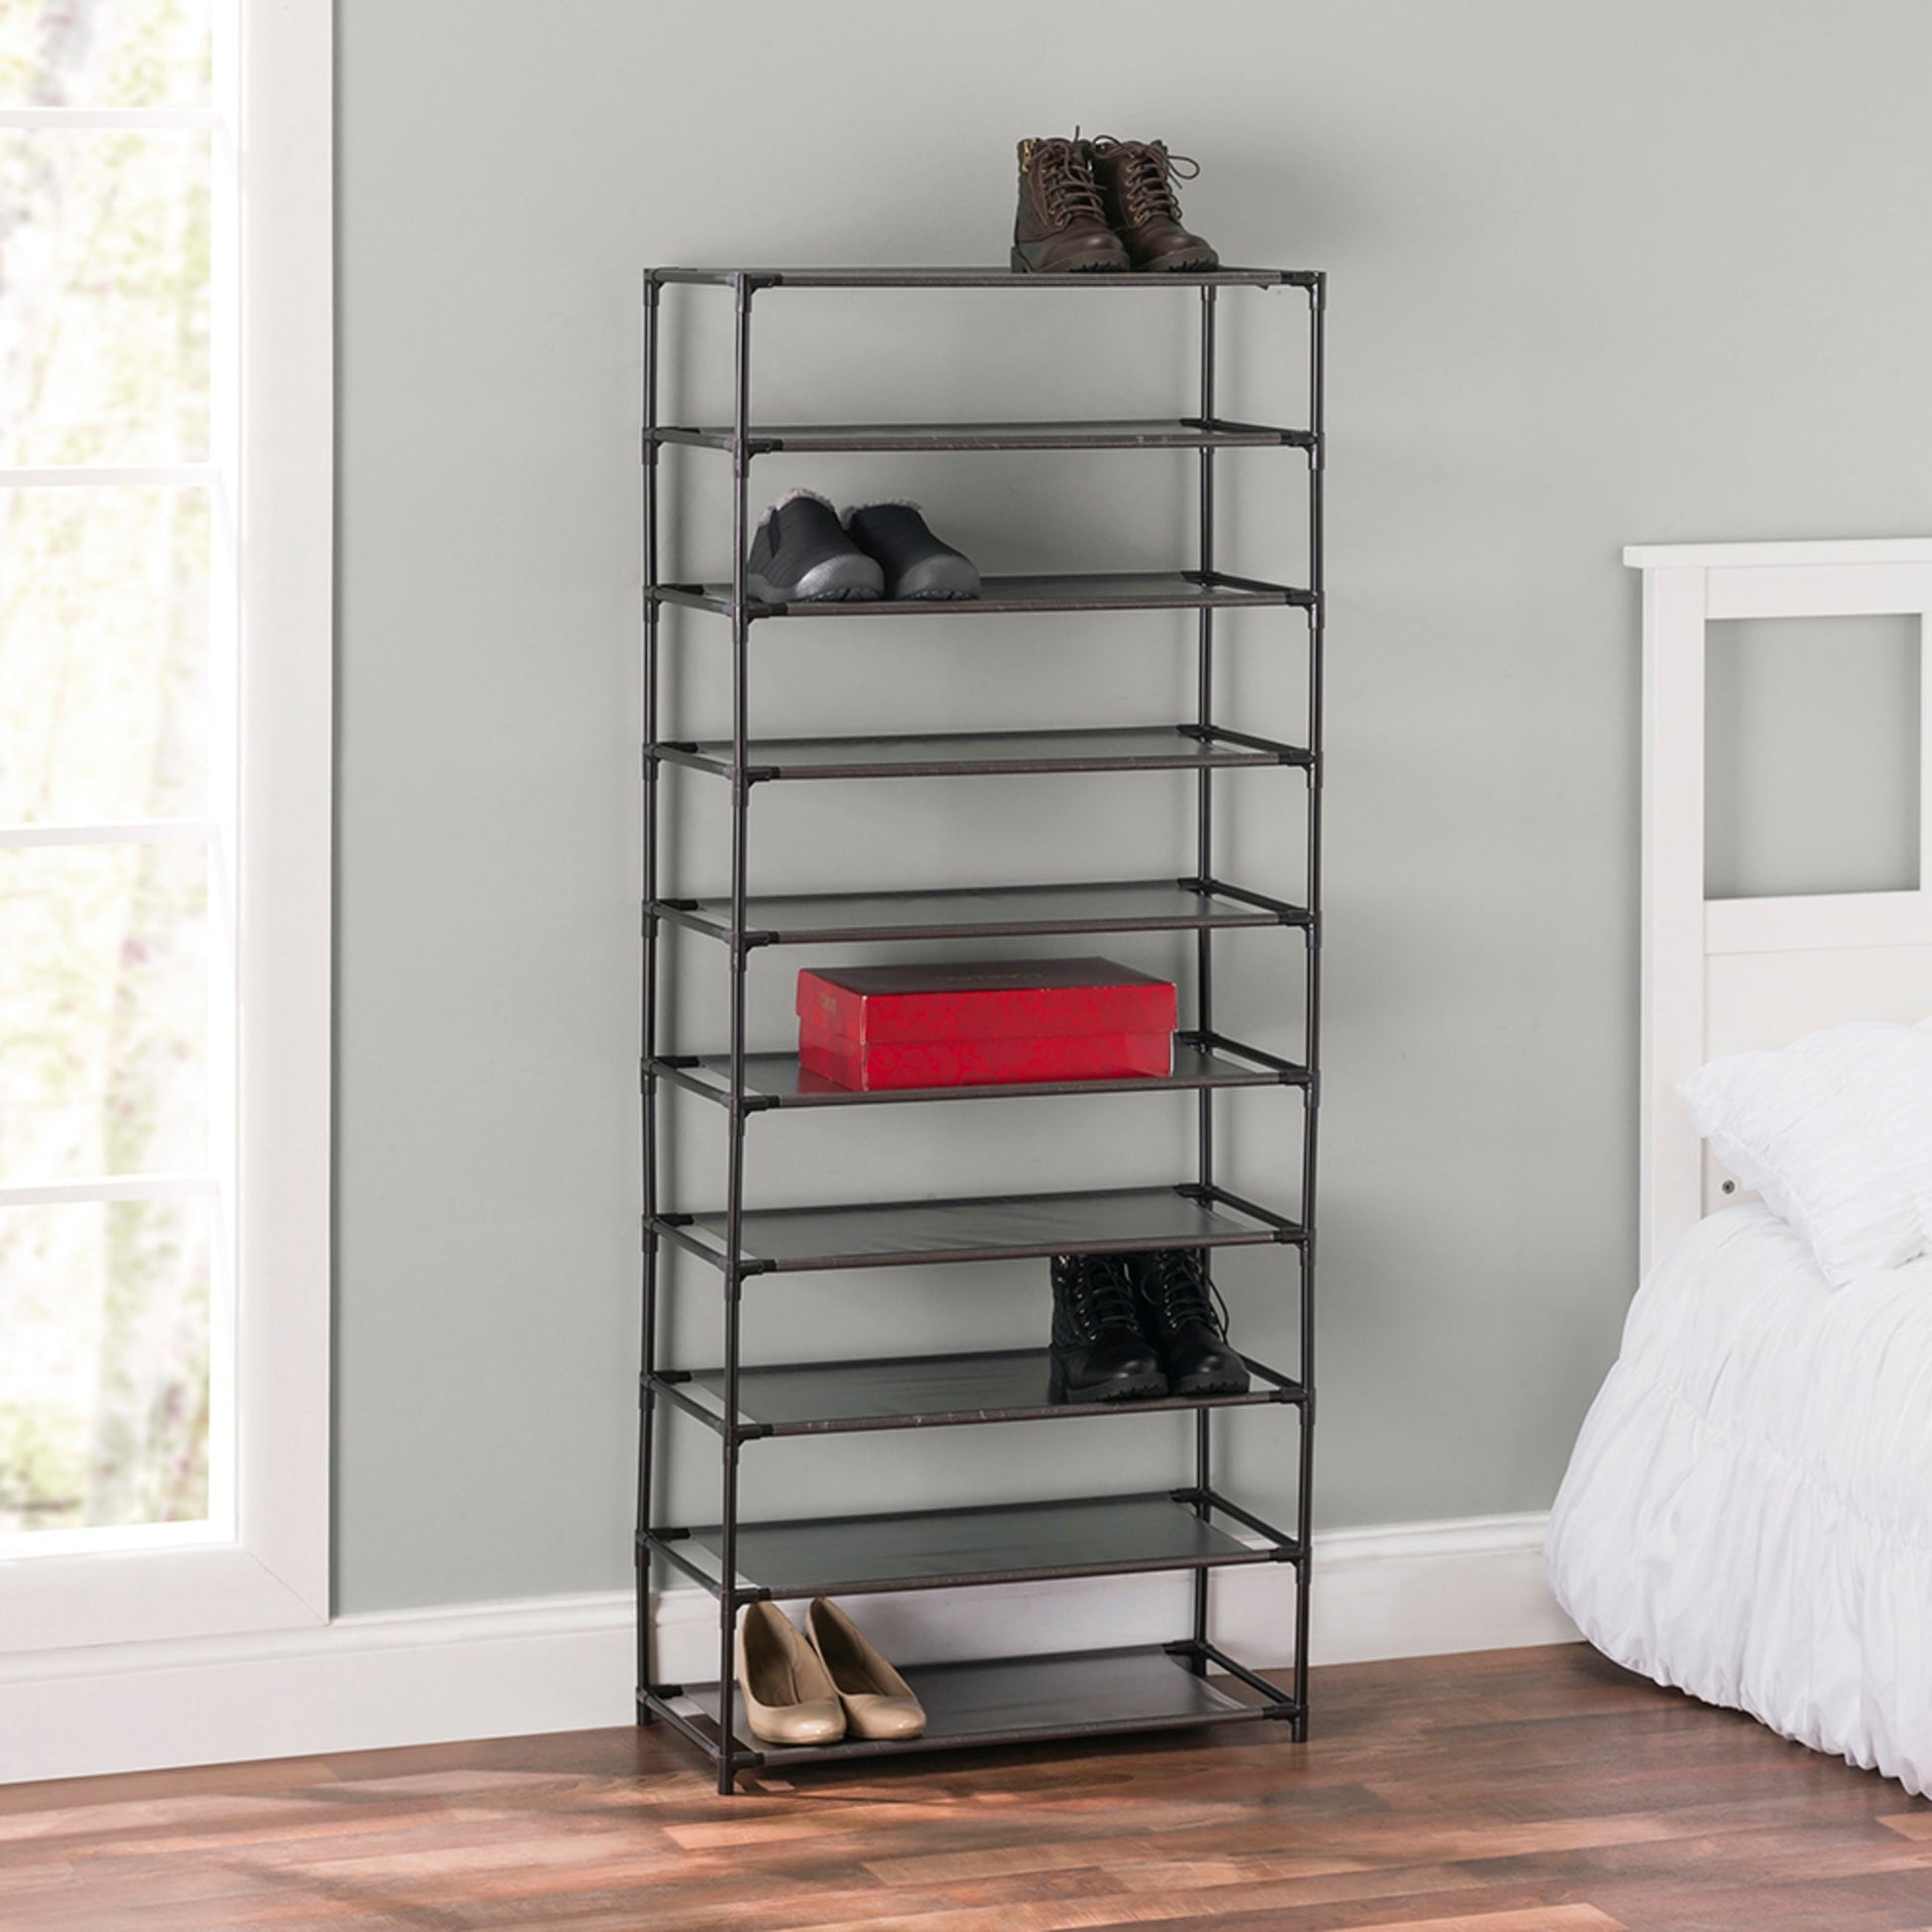 Shoe Rack with 5 Shelves Holds 30 Pairs by Home-Complete